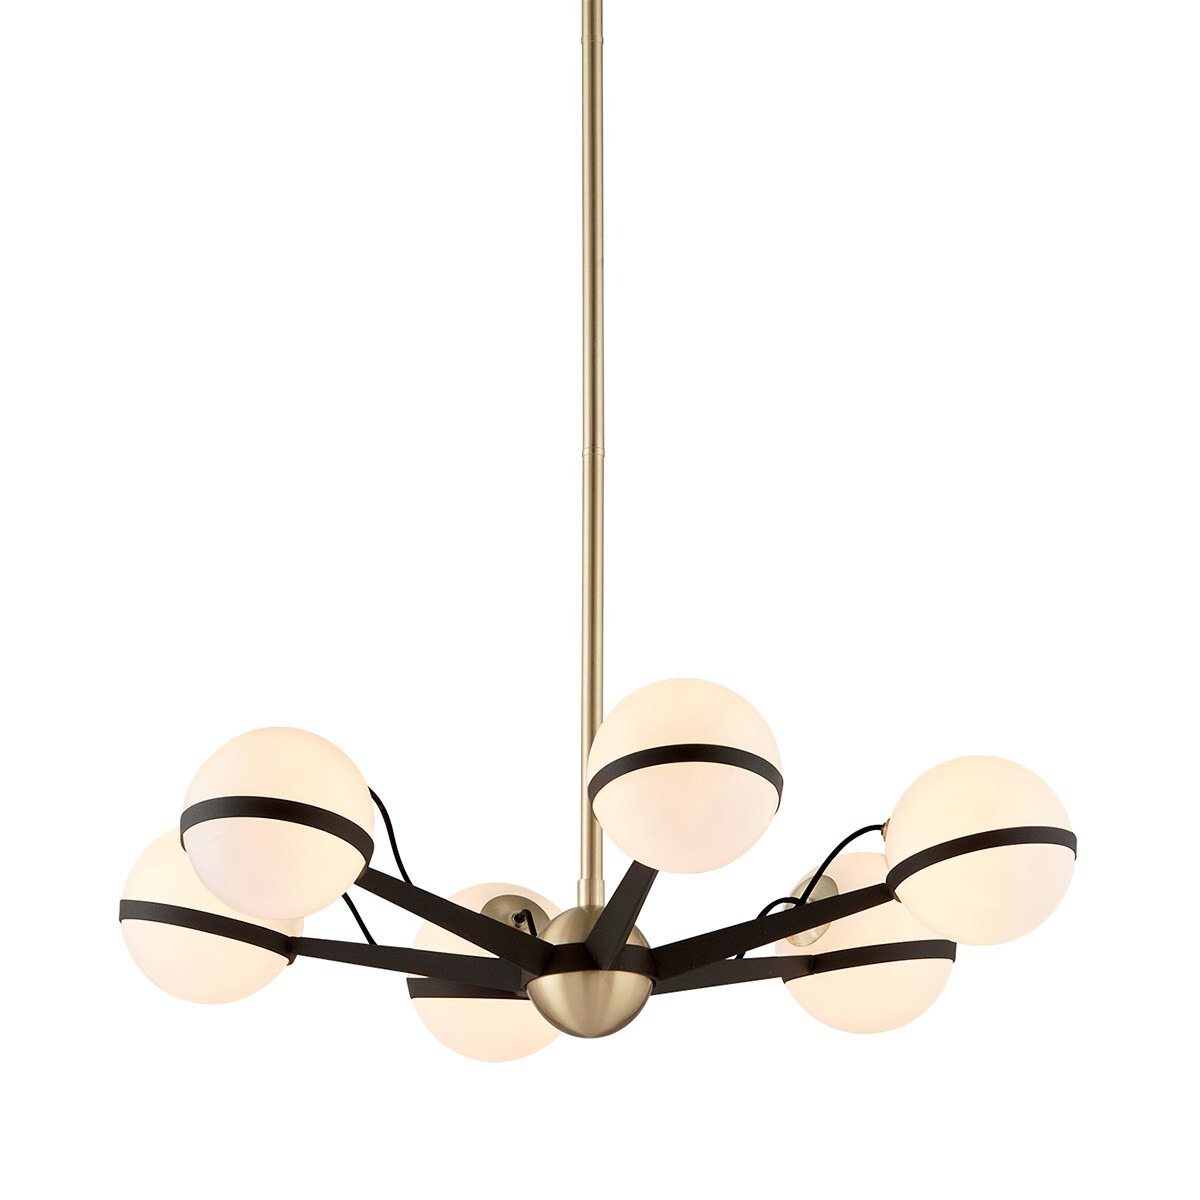 Troy Lighting - Ace Chandelier - Small